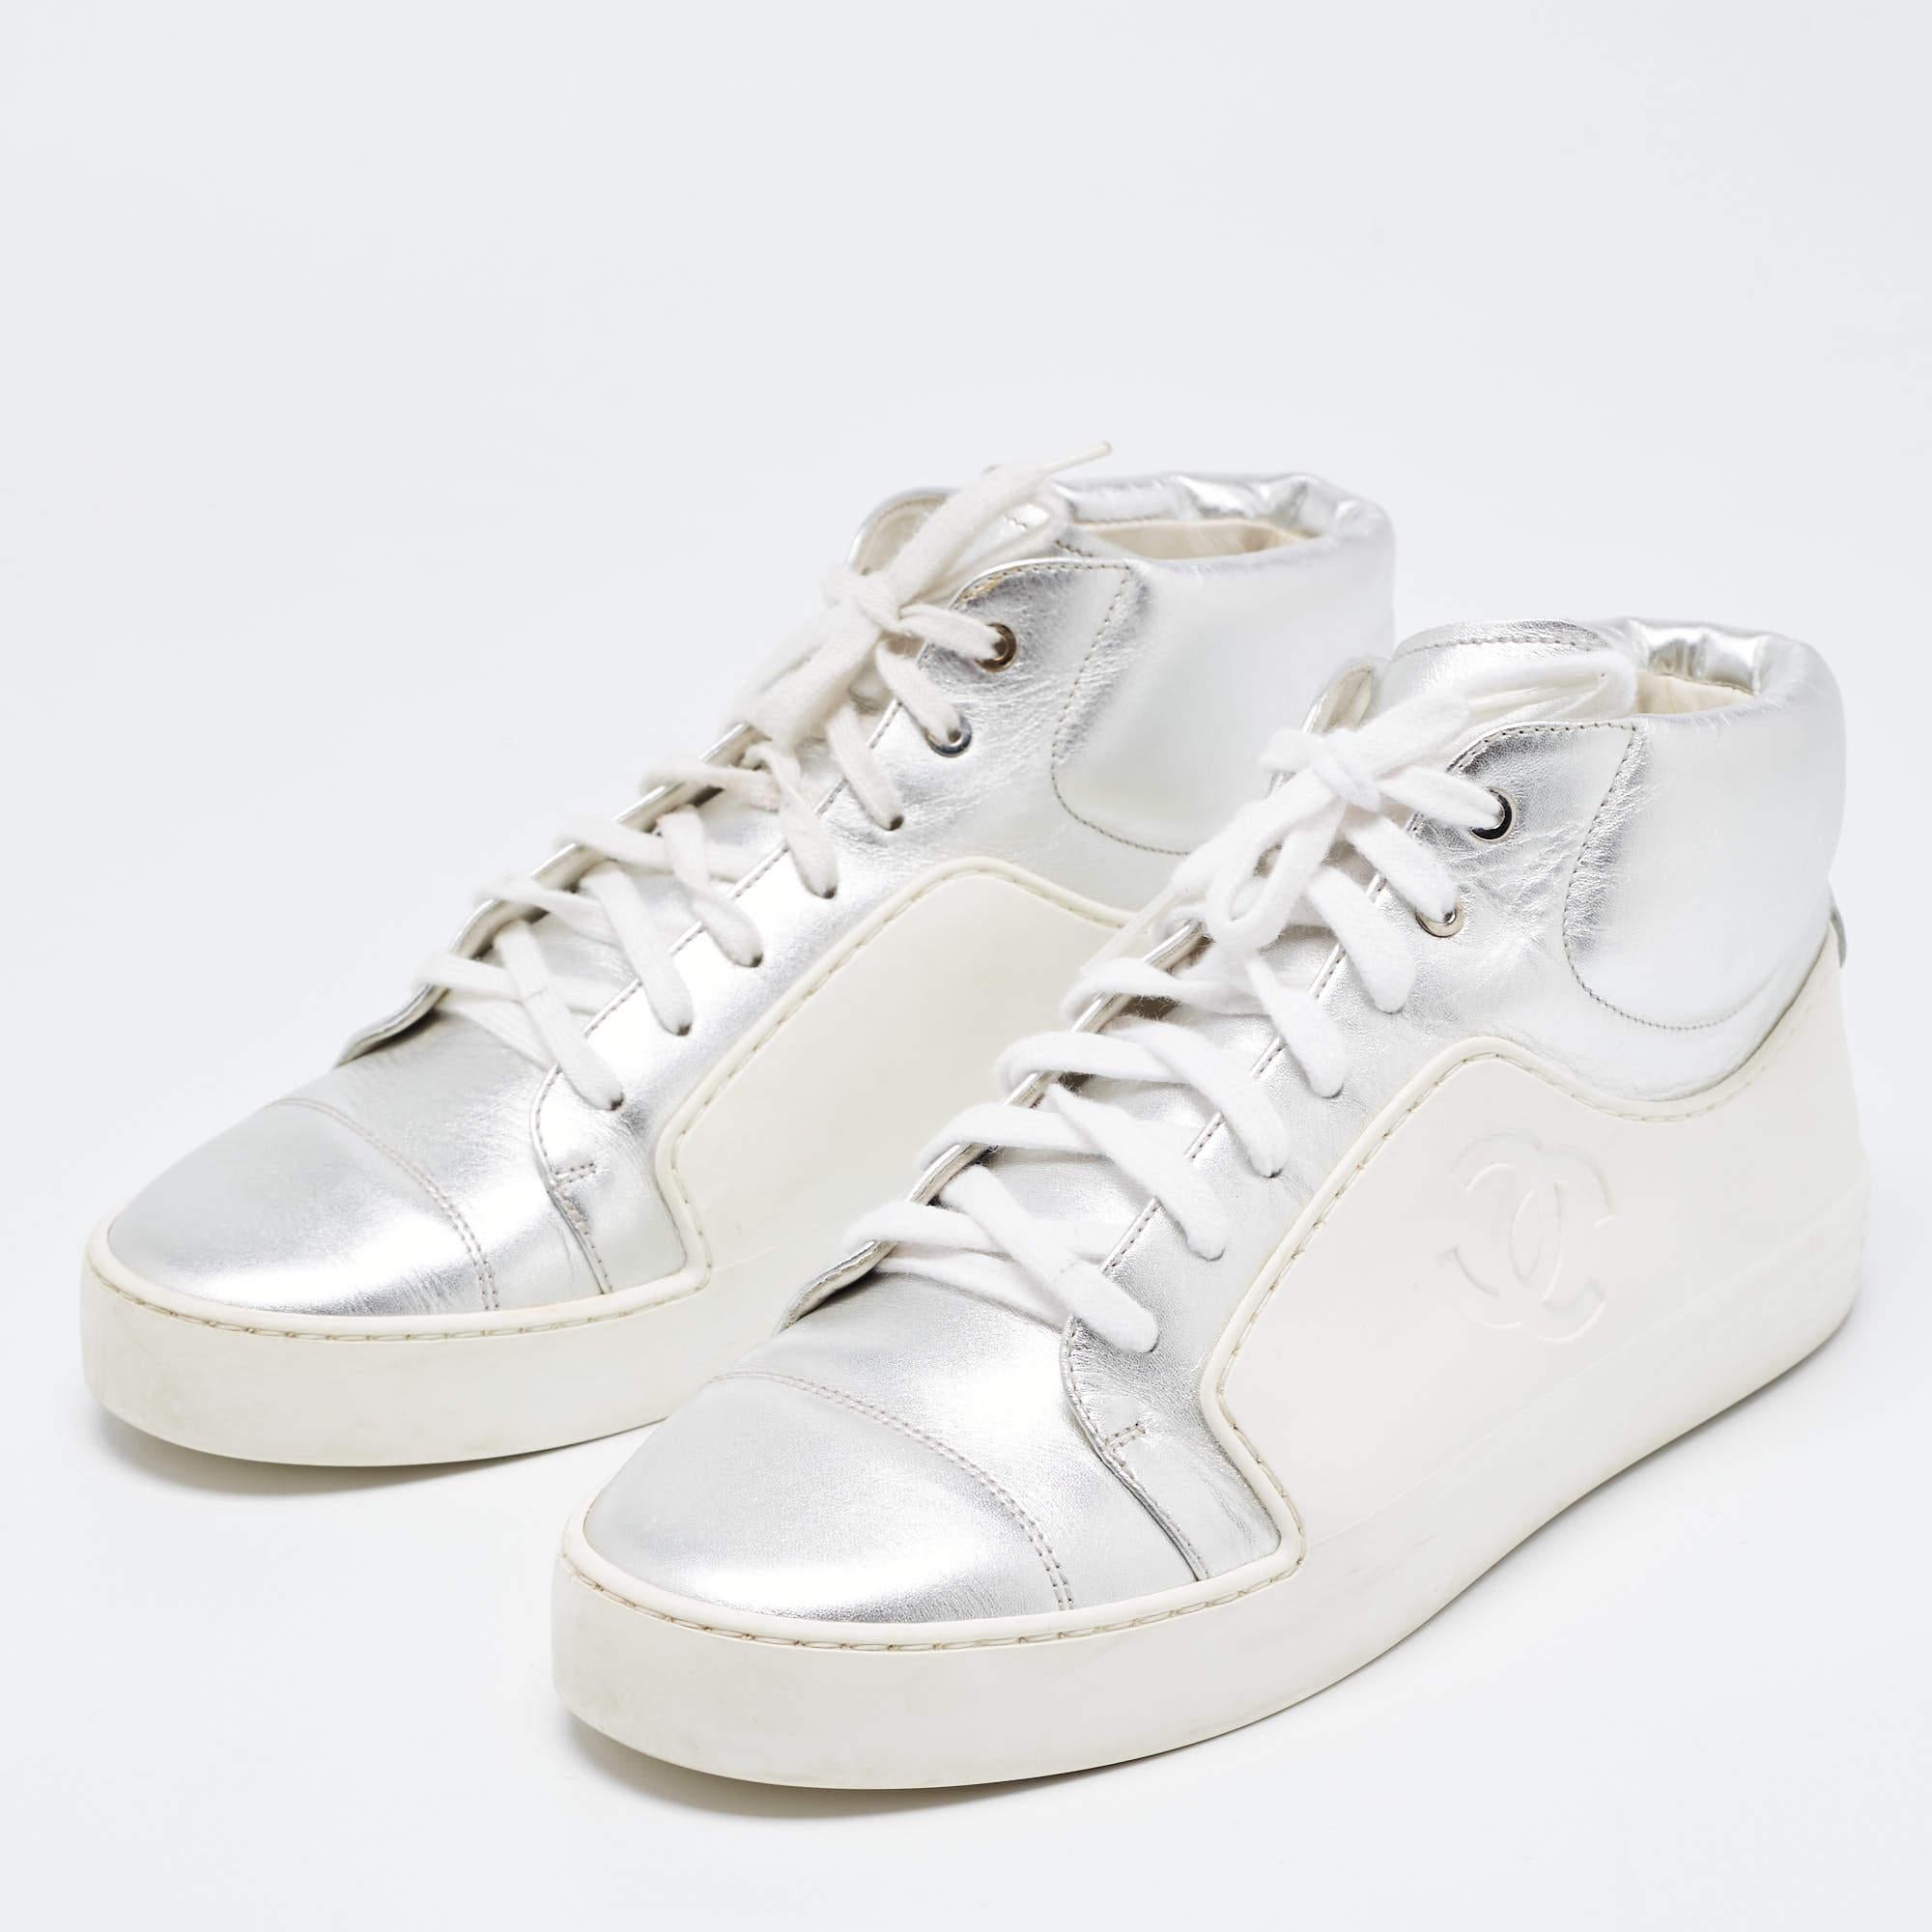 Men's Chanel Metallic Silver/White Leather And Rubber Lace Up High Top Sneakers Size 3